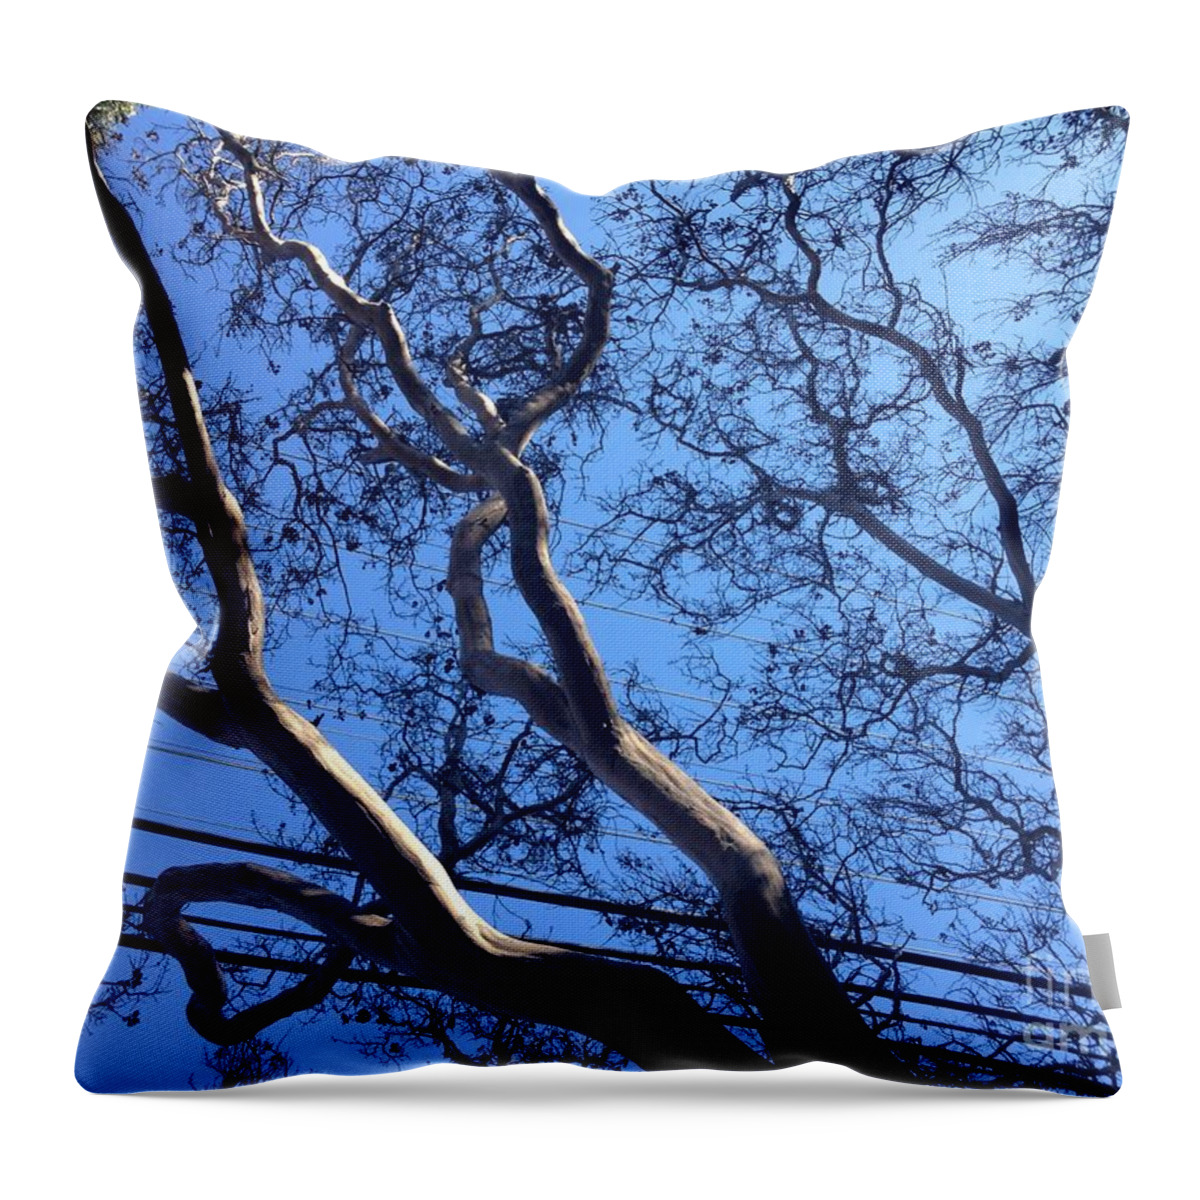 Magnificence Throw Pillow featuring the photograph Magnificence by Nora Boghossian